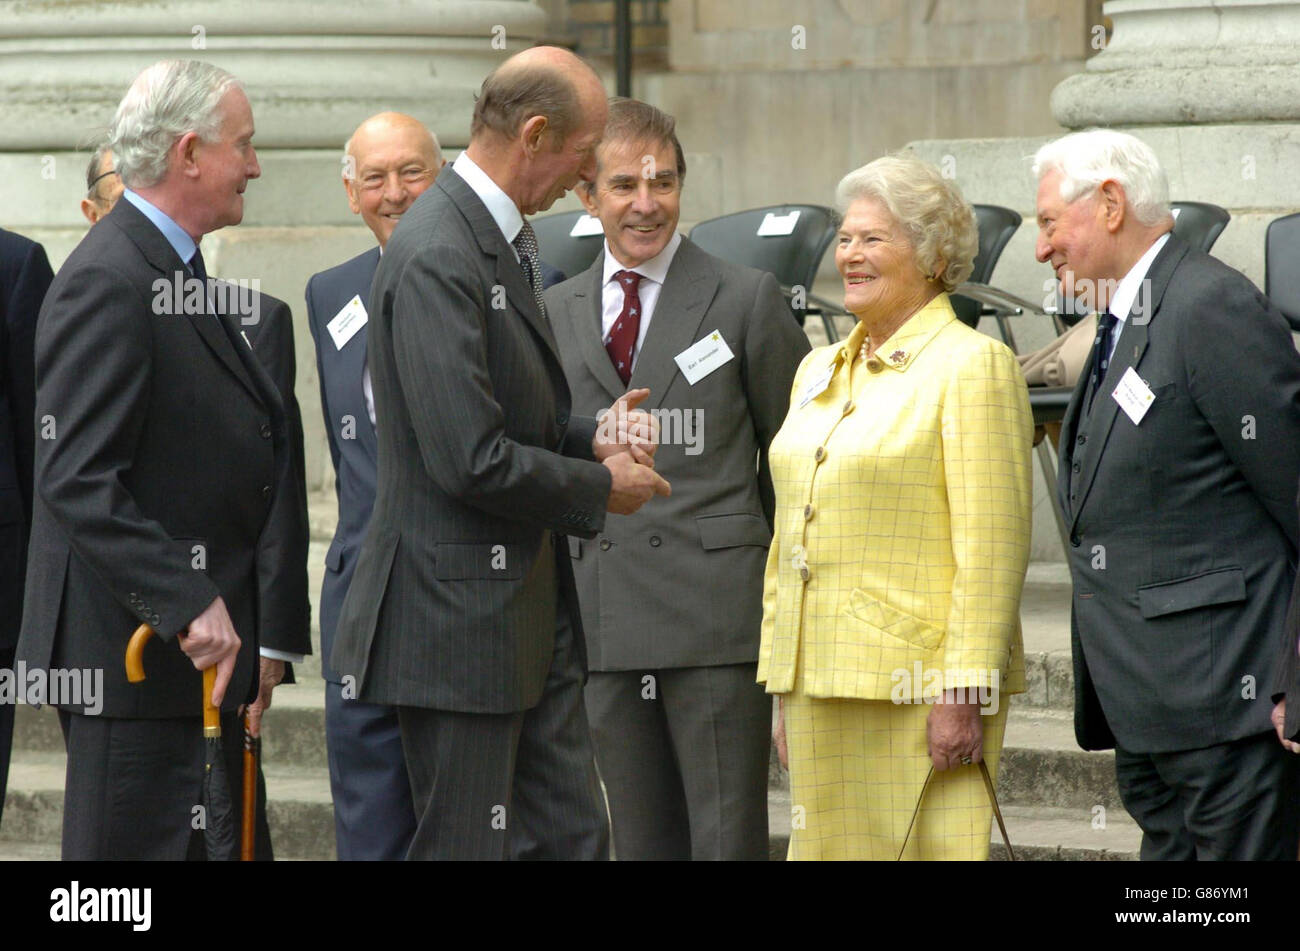 The Duke of Kent meets Lady Soames, the youngest daughter of Sir Winston Churchill. World War II veterans were present at the reception which had HRH The Duke of Kent as the guest of honour who met among others Viscount Montgomery (2nd left), Earl Alexander (centre) and Field Marshall Lord Bramall (right). Stock Photo